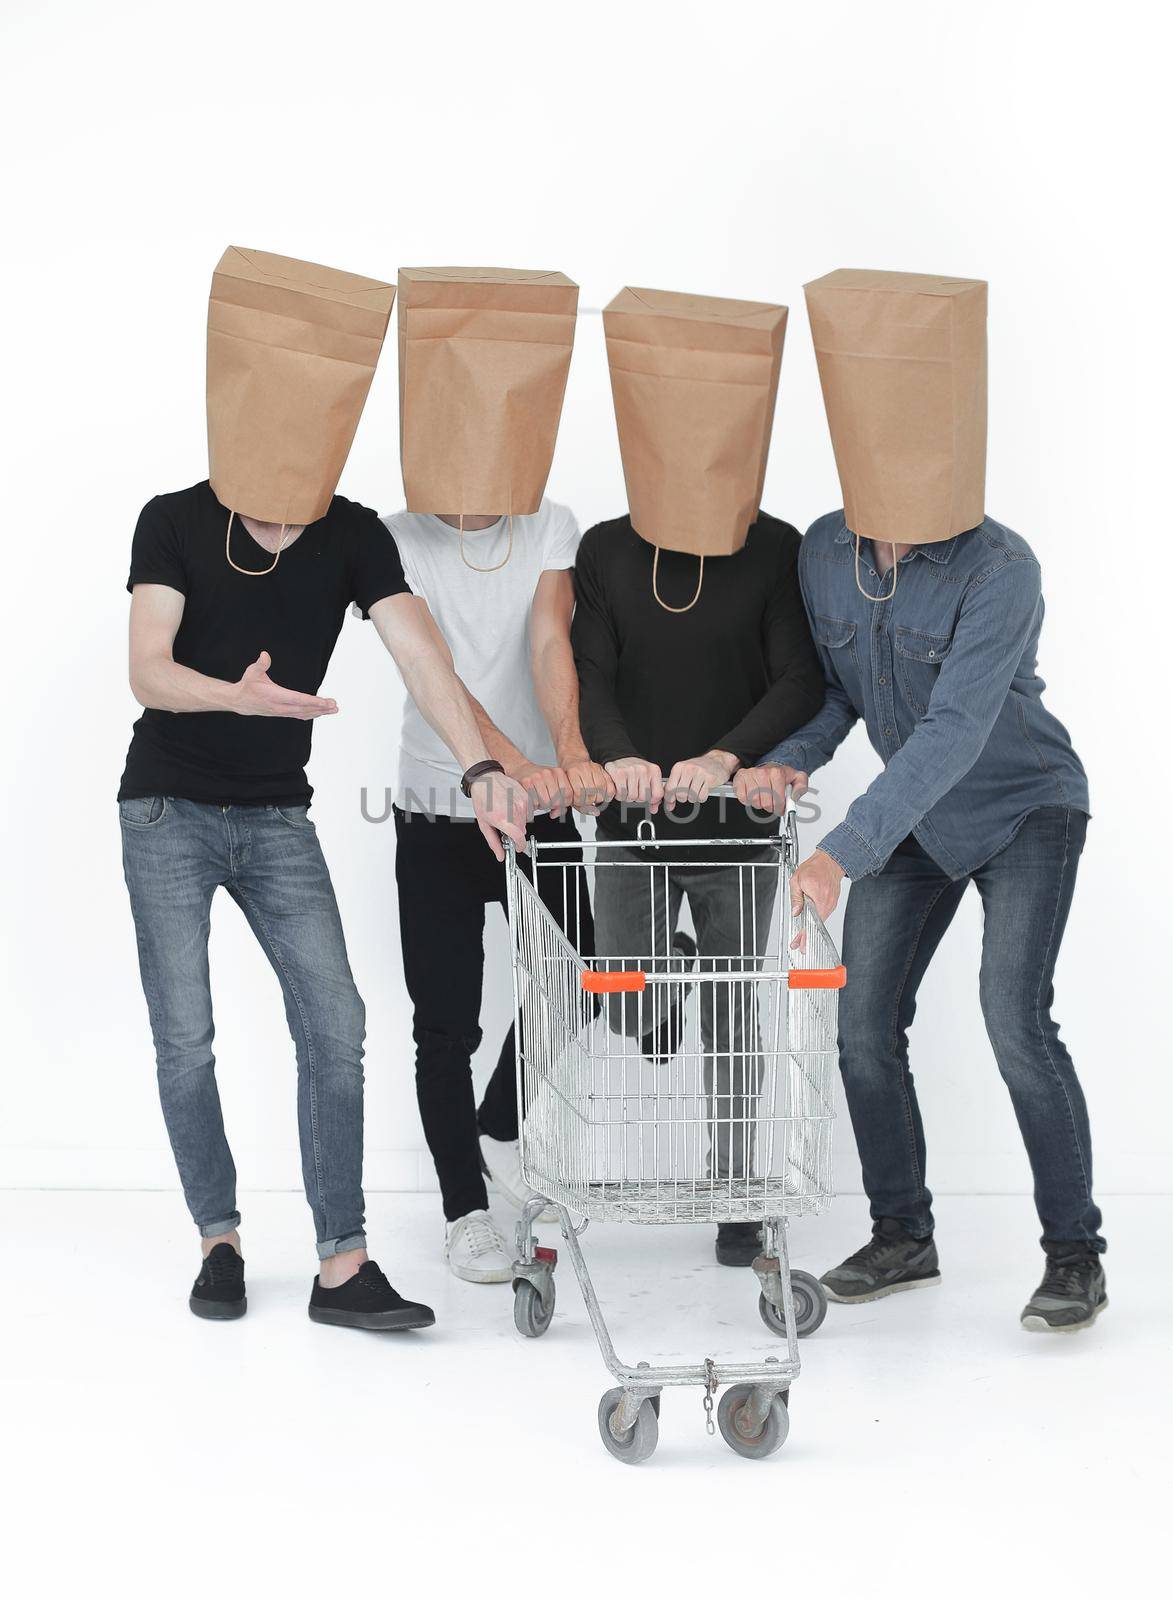 group of people with empty shopping carts. by asdf